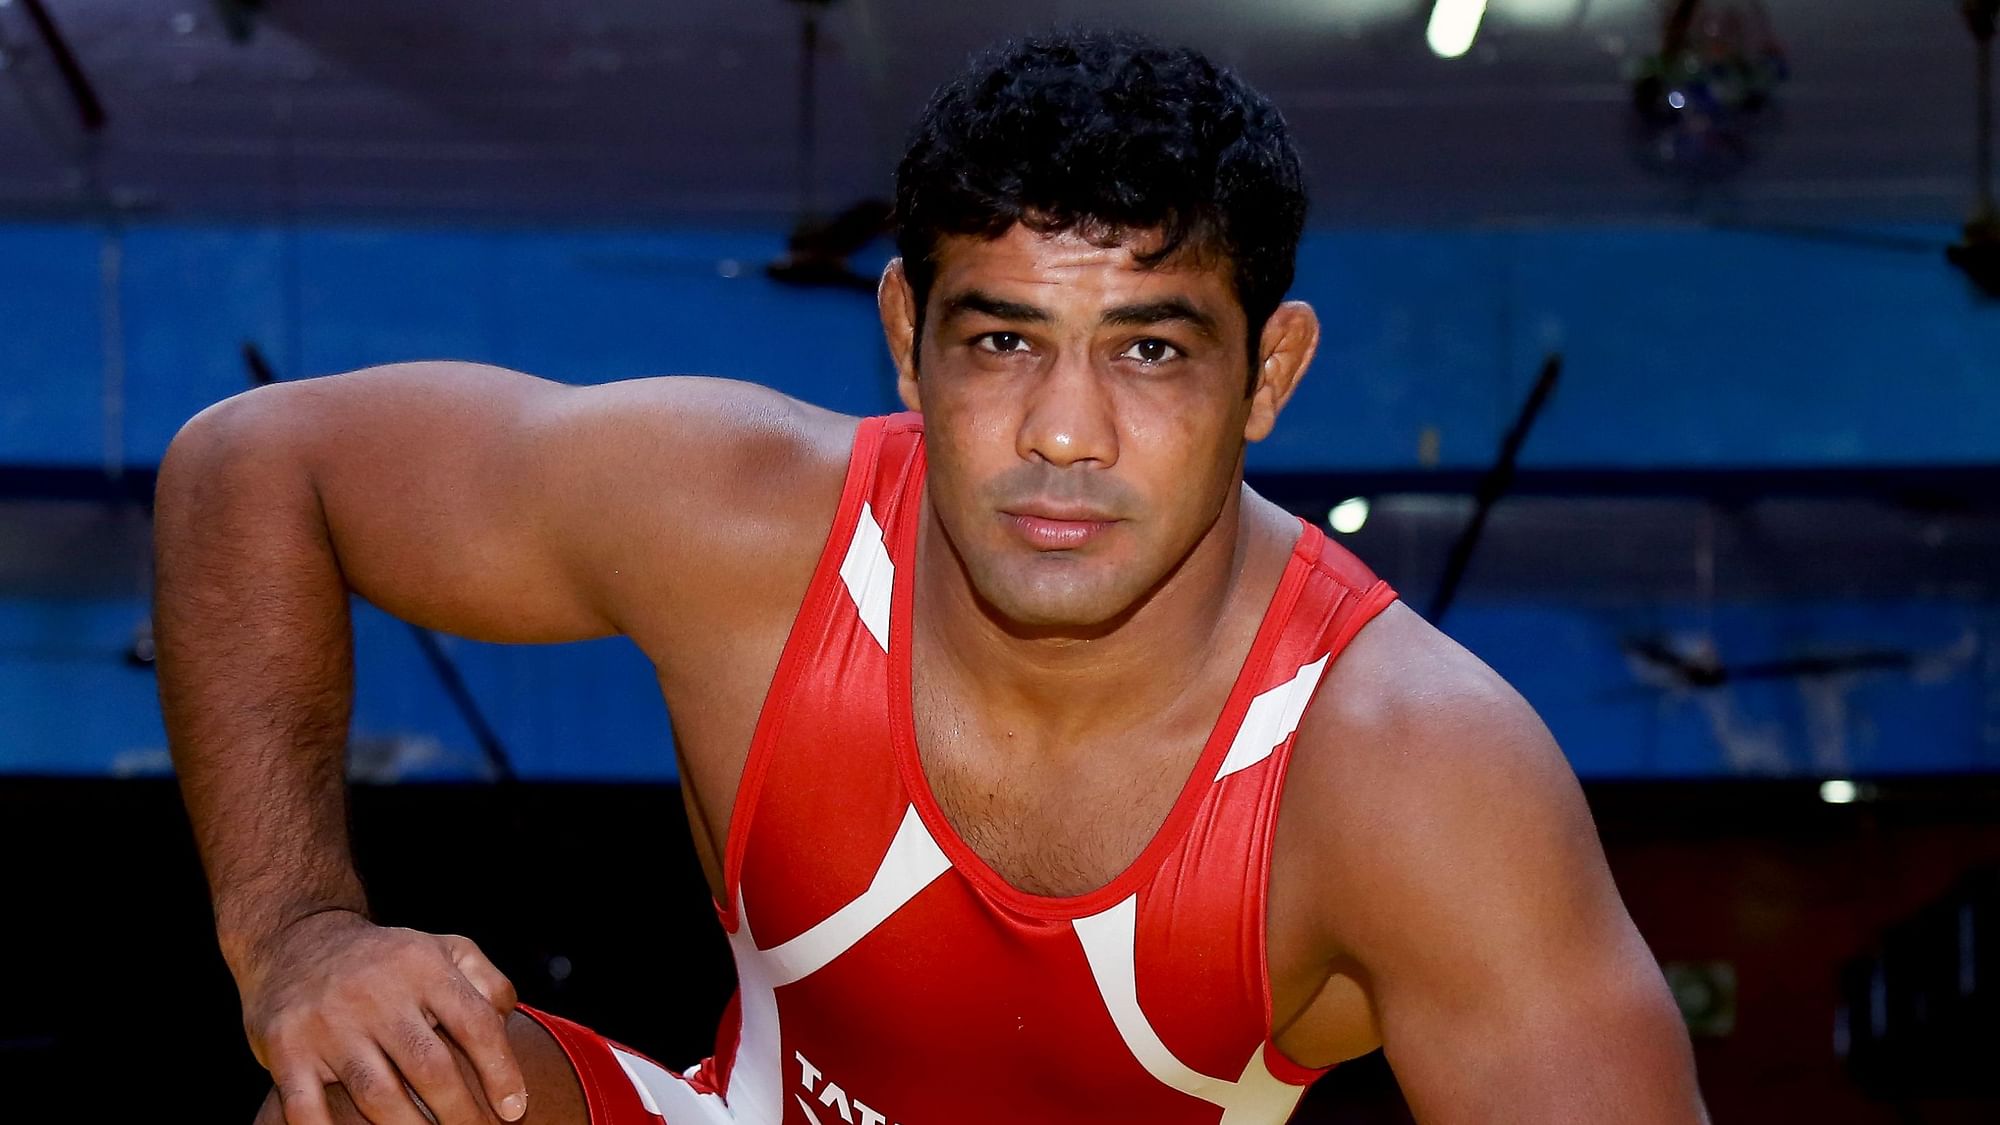 Two time Olympic medallist Sushil Kumar who is nursing a shoulder injury has requested the Wrestling Federation of India (WFI) to postpone his trials for next month’s Asian Championships and the continental Olympic qualifiers in March.